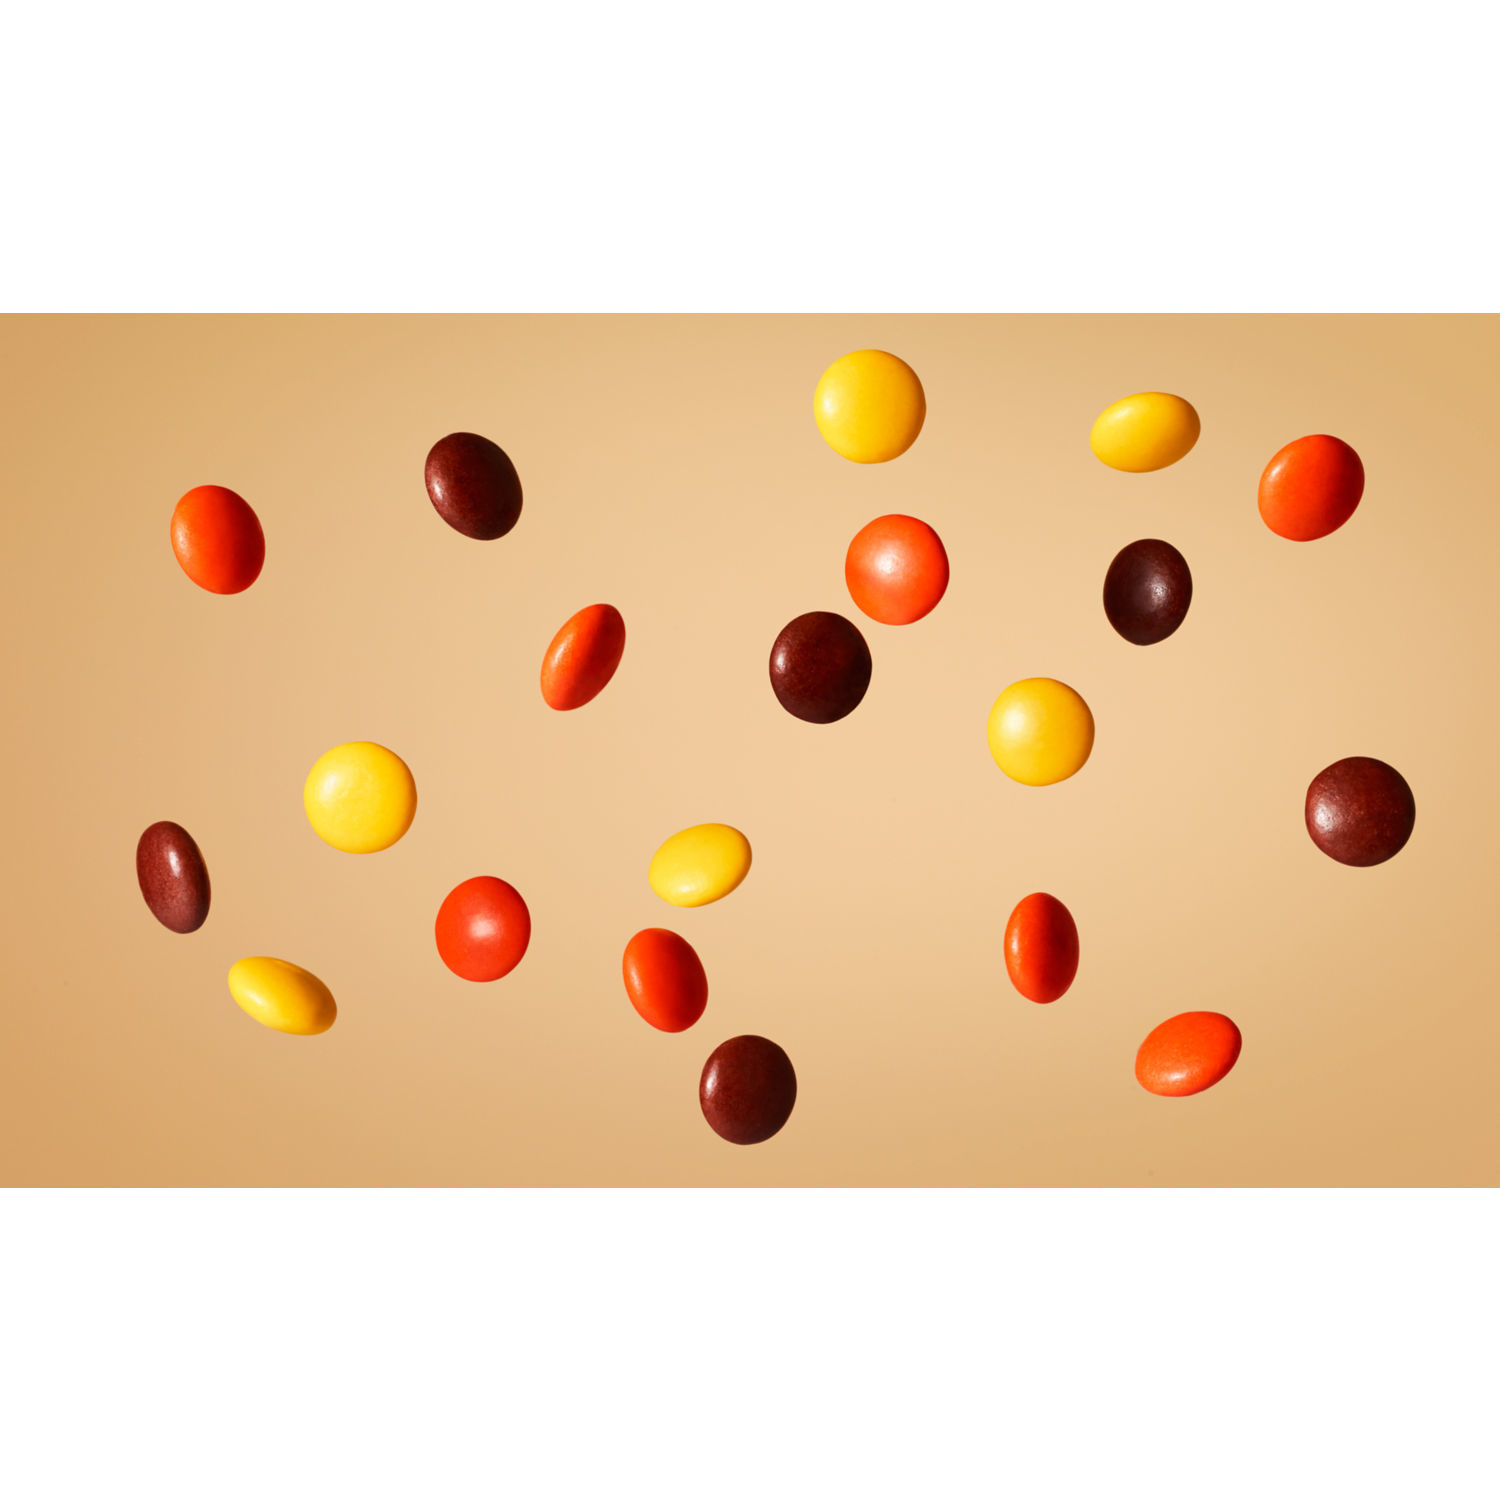 Reese's Pieces Peanut Butter Christmas Candy, Plastic Cane 1.4 oz - image 3 of 8